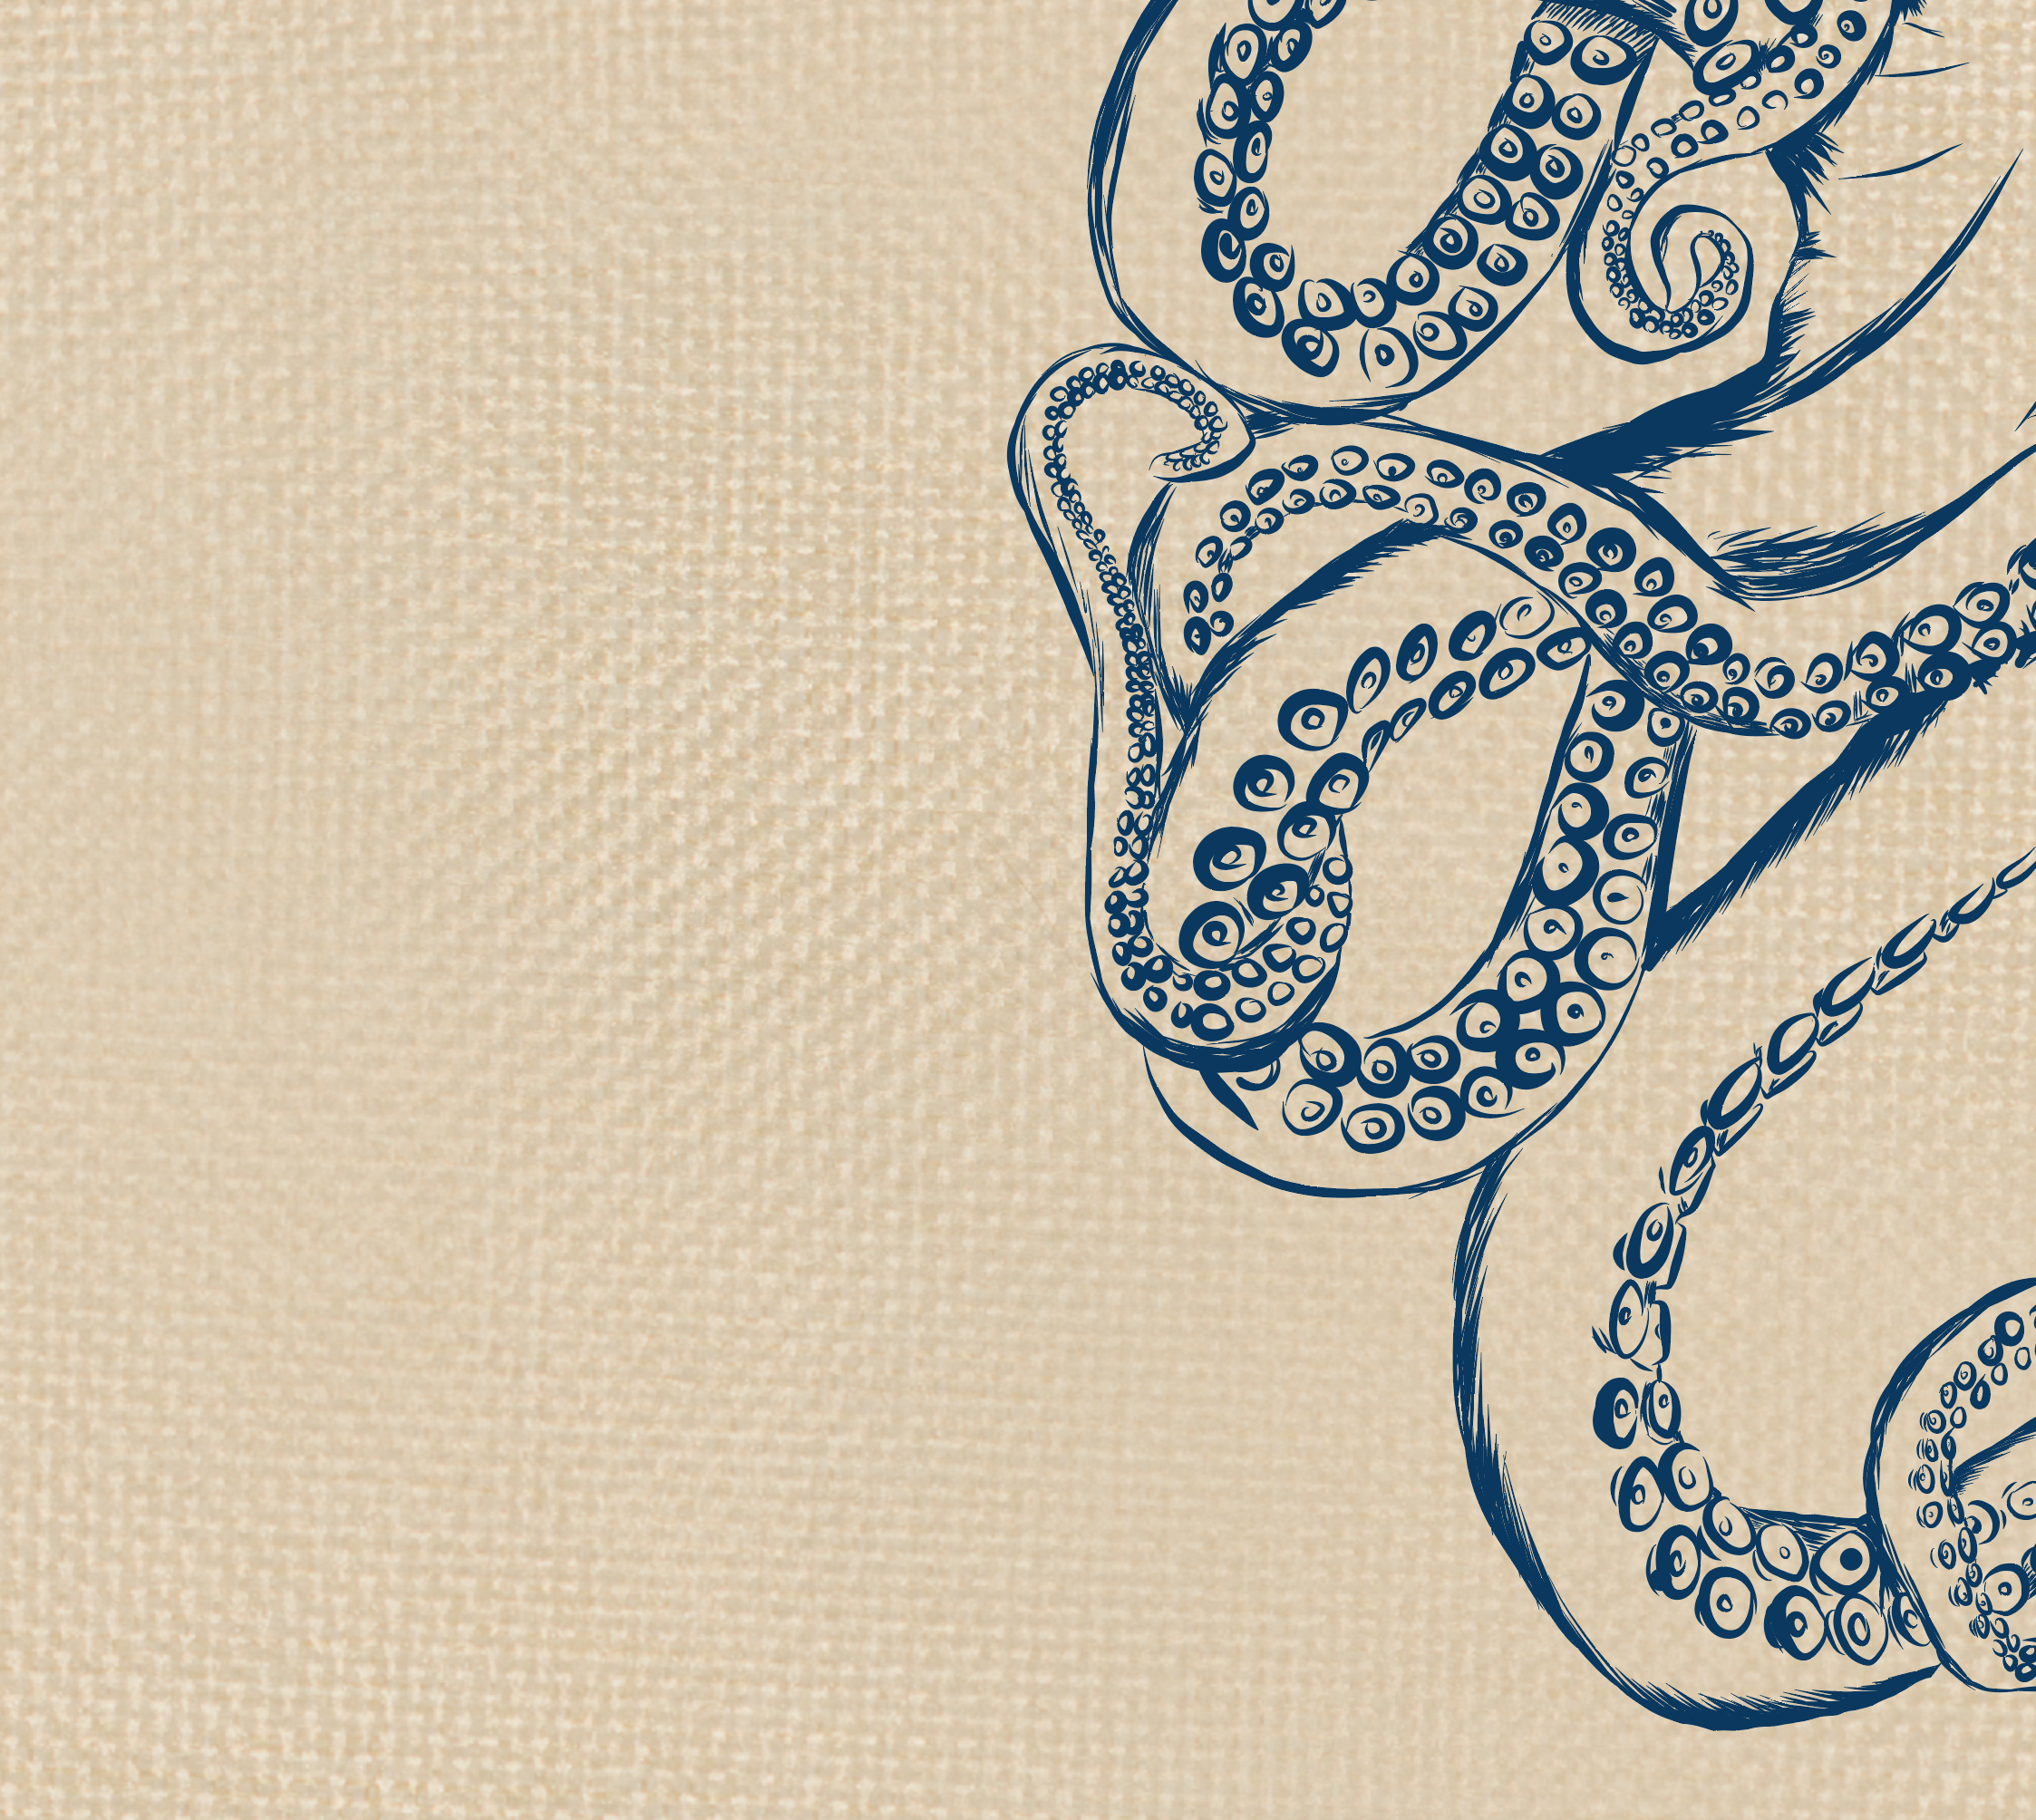 Octopus Nautical Theme - Illustration , HD Wallpaper & Backgrounds